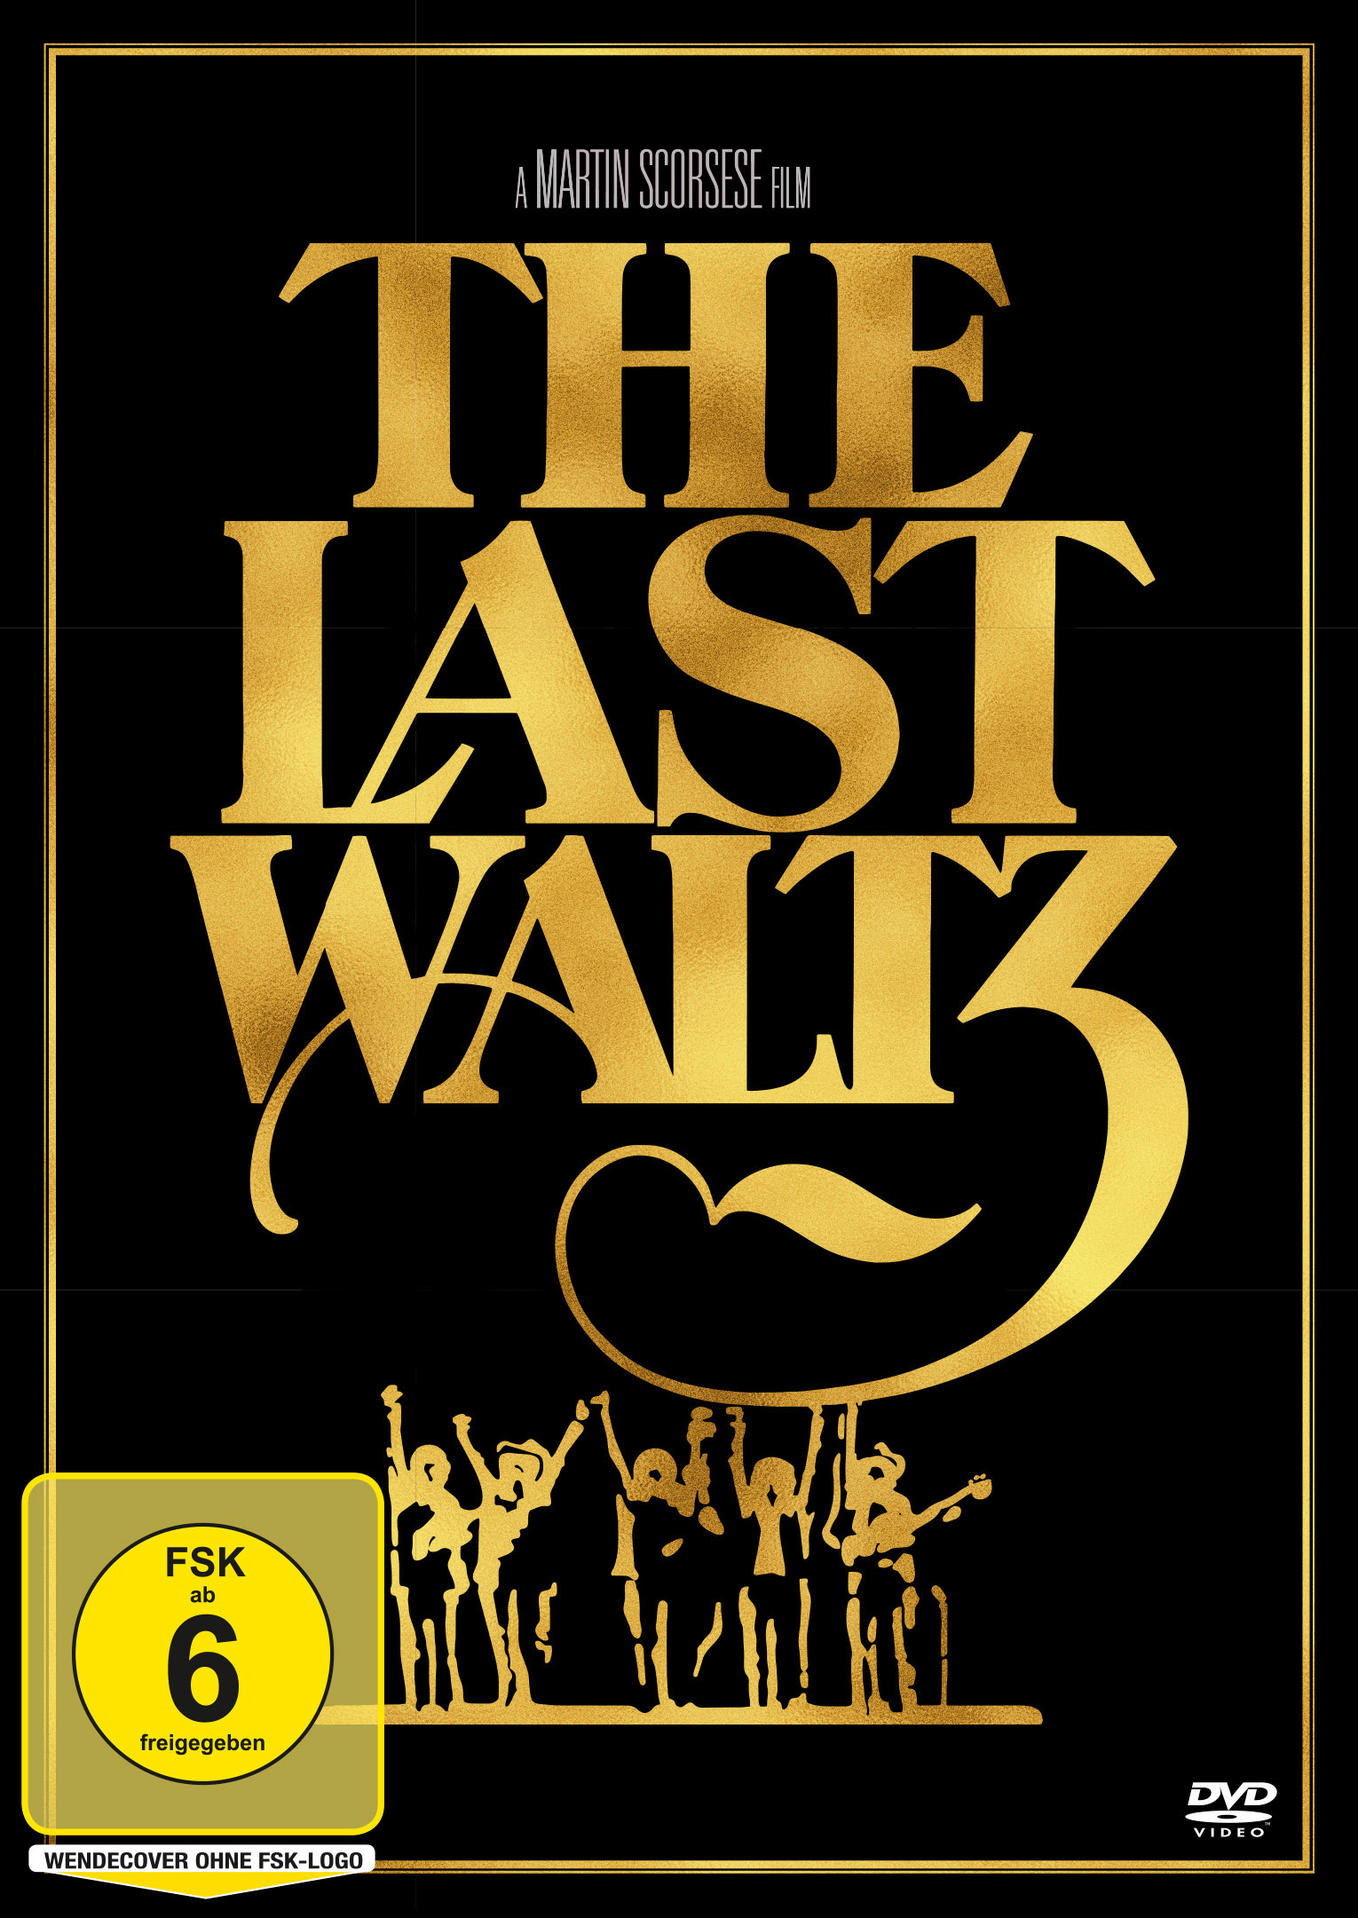 The Band - The Last Waltz DVD